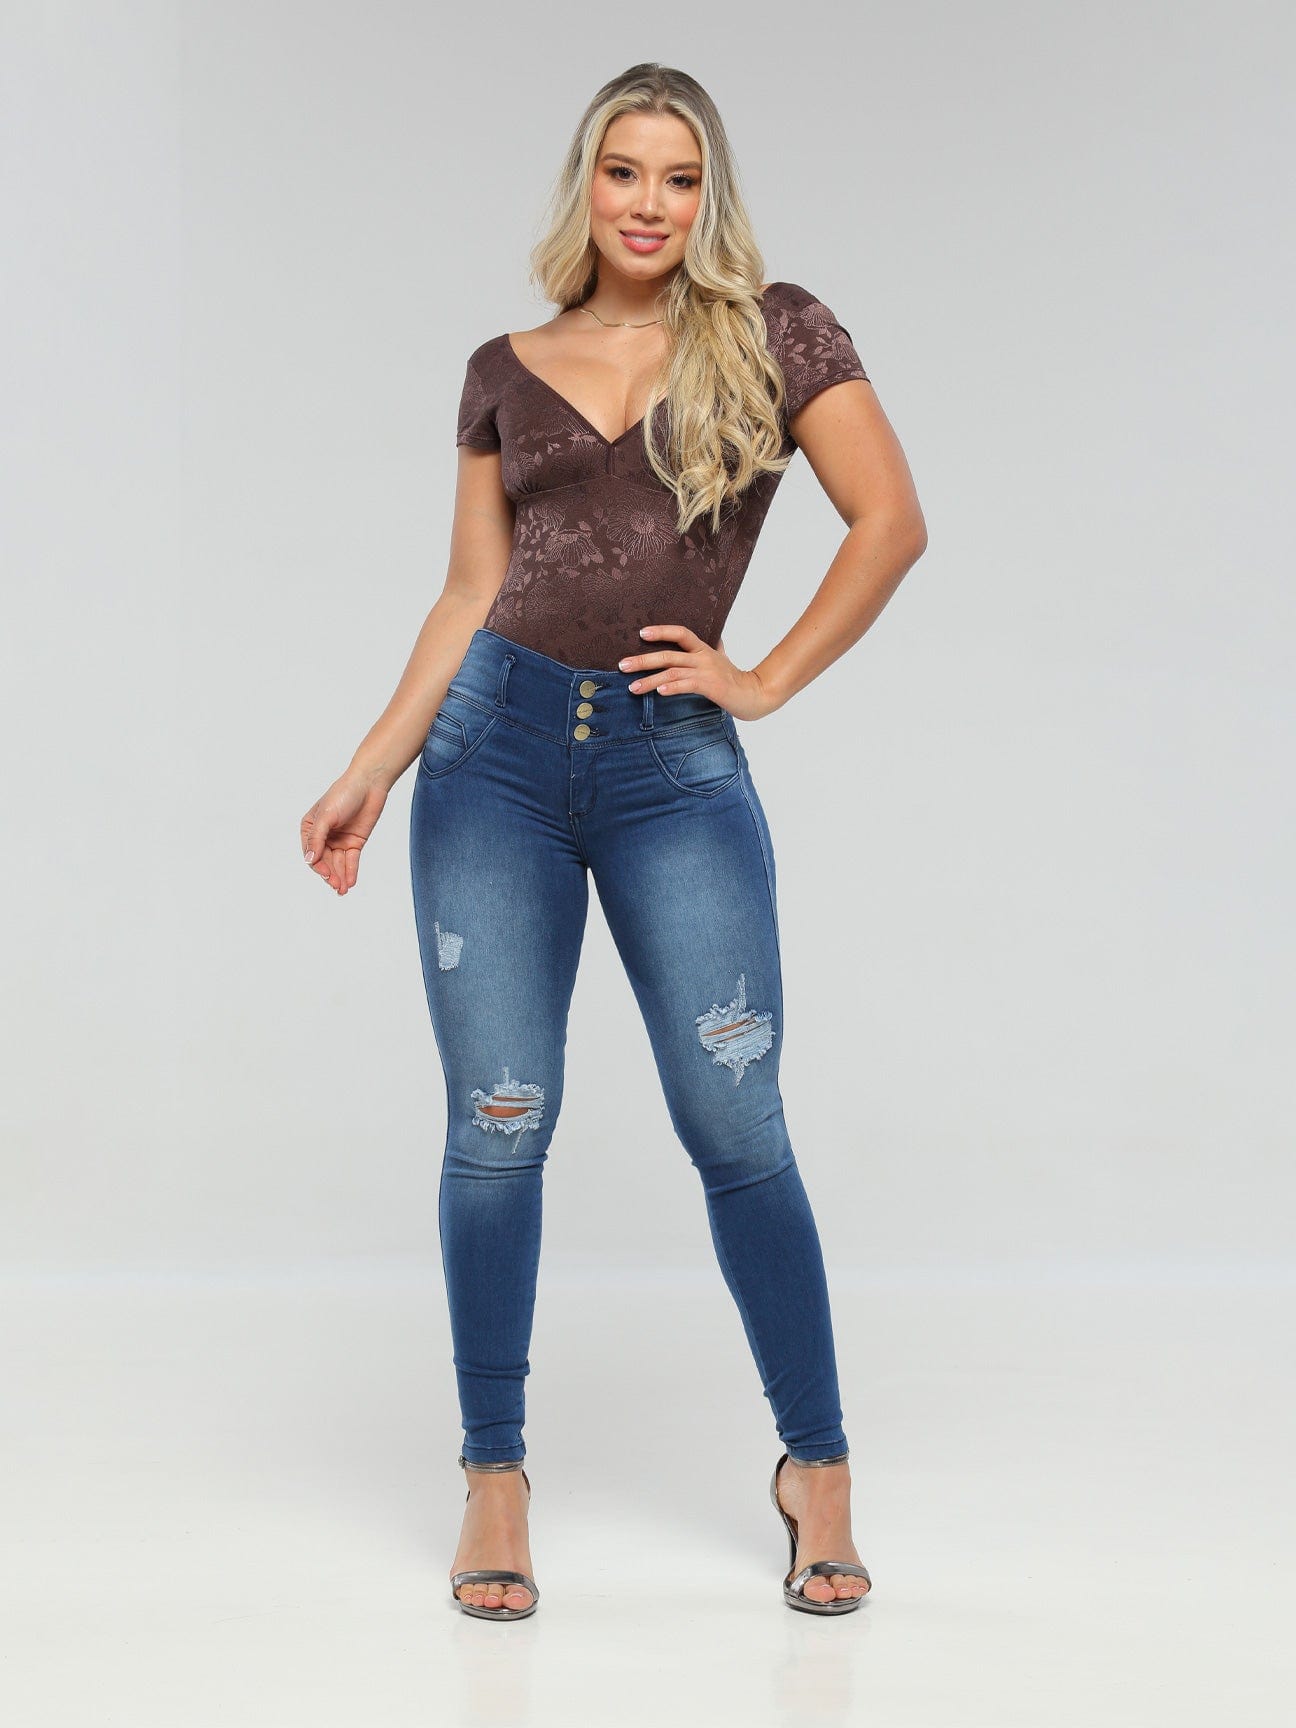 Dalila 100% Authentic Colombian Push Up Jeans 